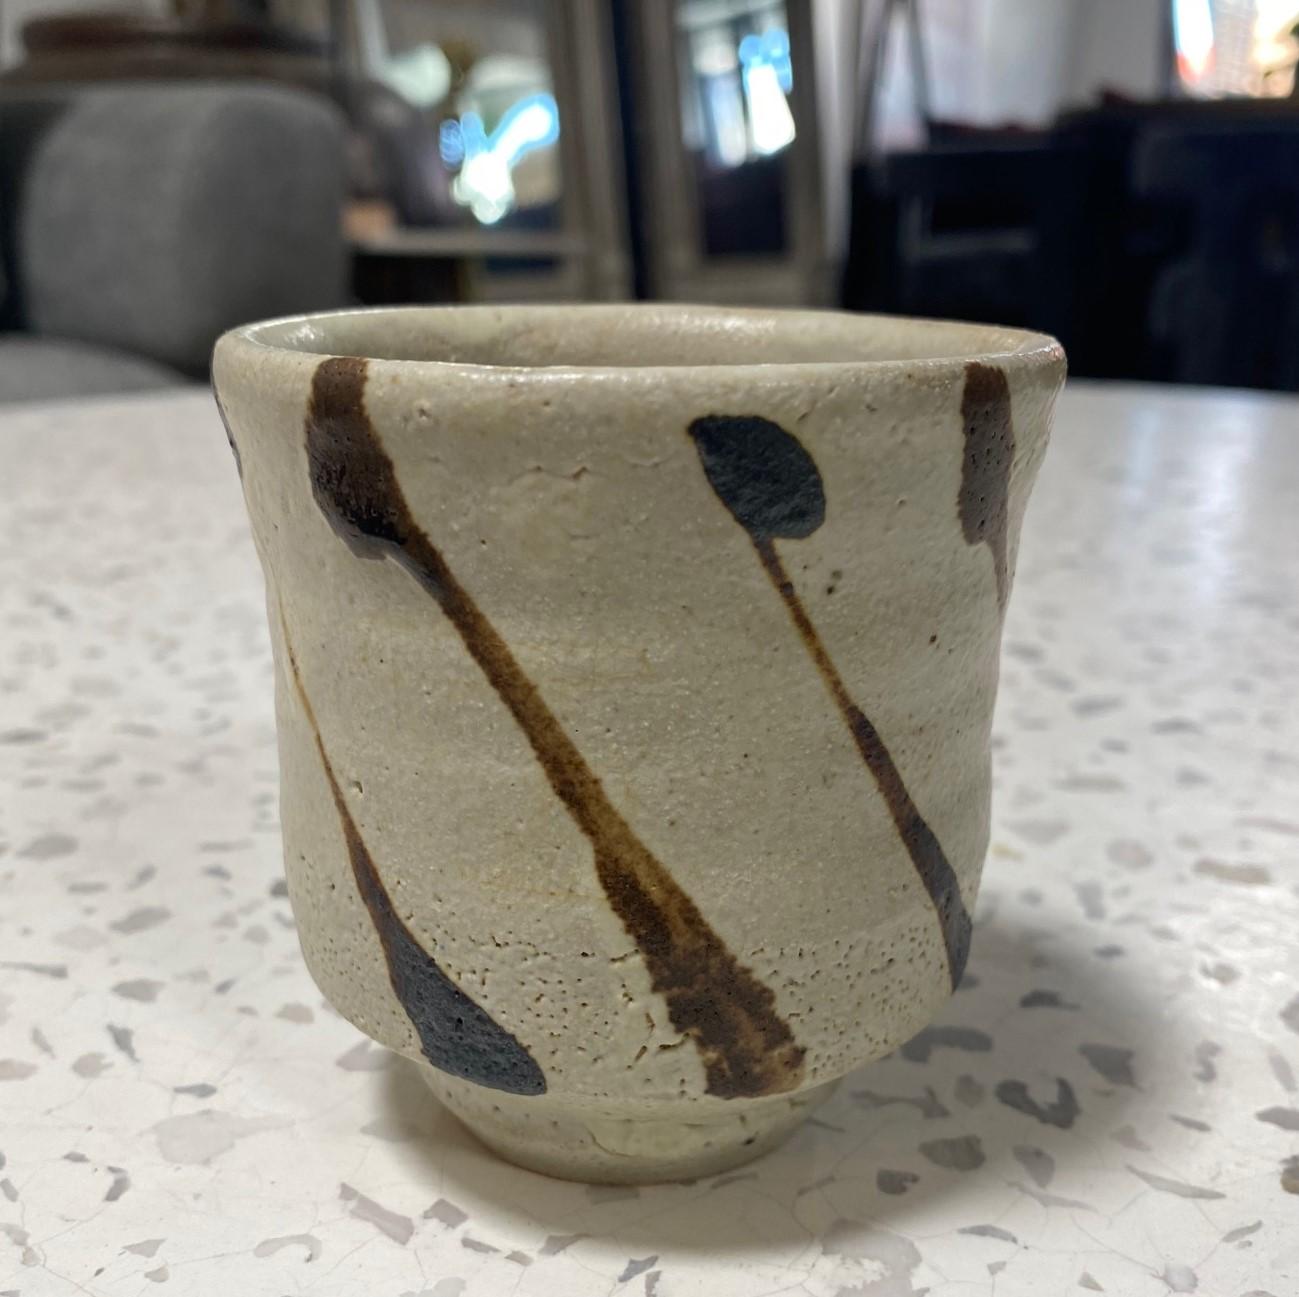 An exquisite, beautifully crafted, and wonderfully designed striped Yunomi teacup by master Japanese potter Shoji Hamada featuring his nuka glaze over Mashiko stoneware pottery and hand-painted iron motif design. A unique work. Rare to find such a